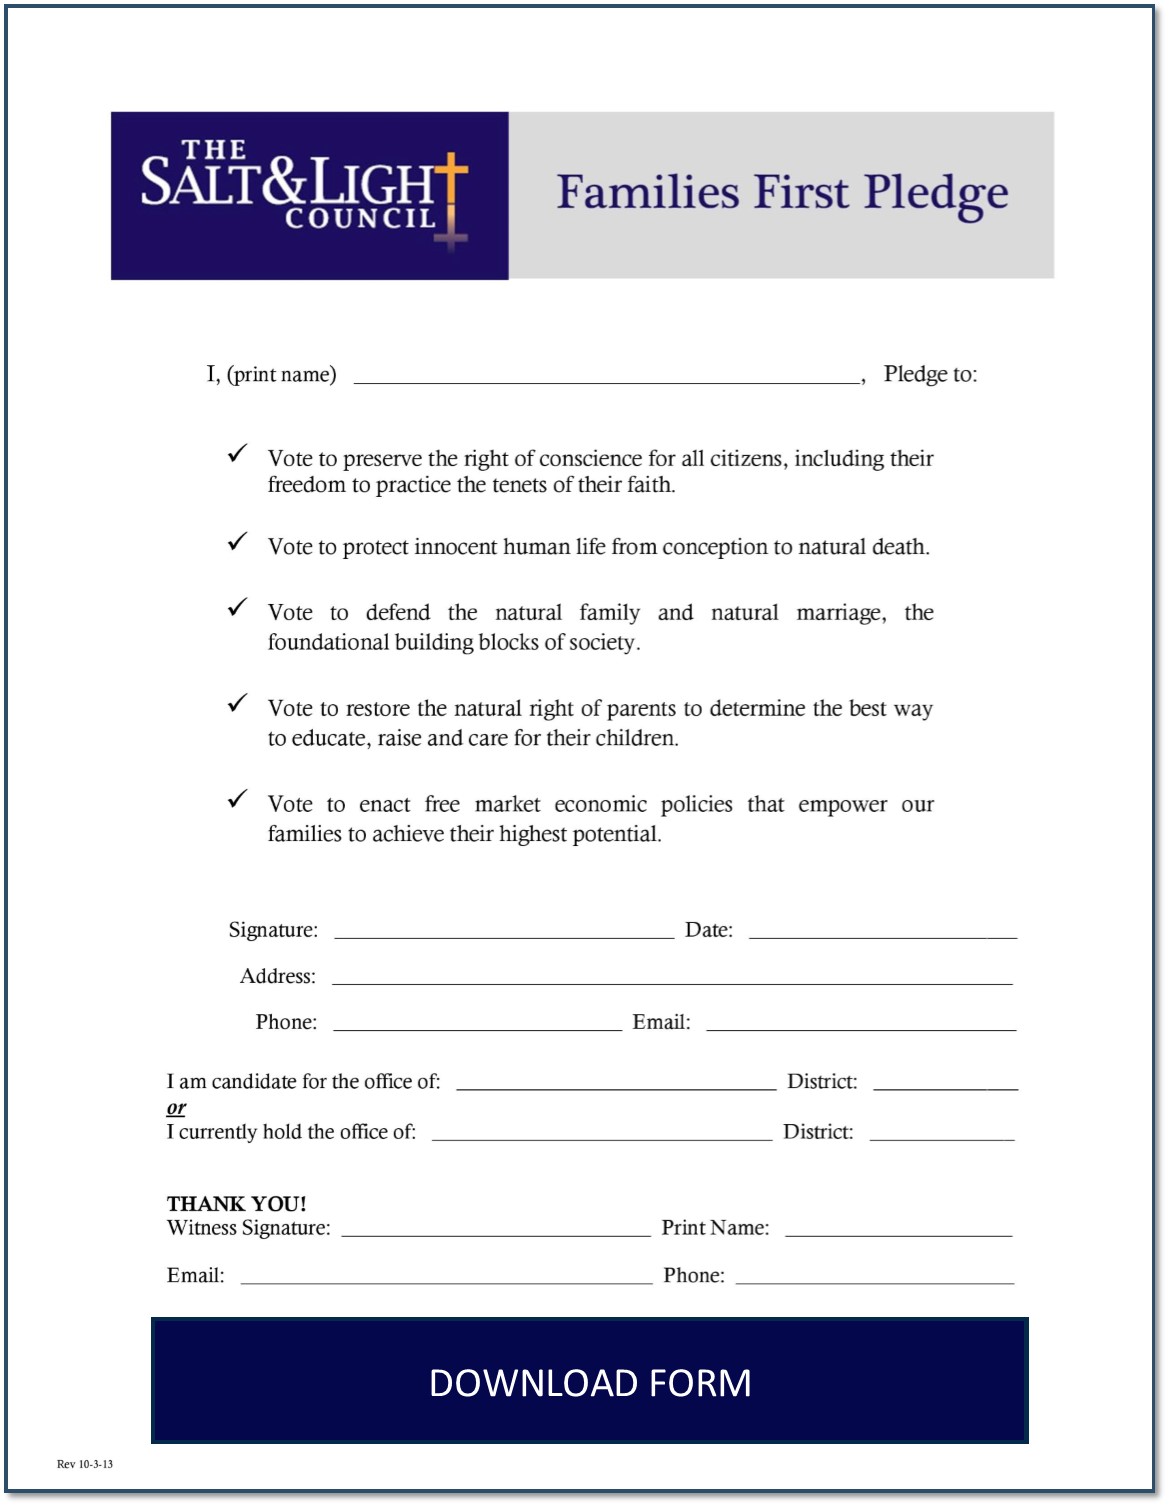 Families First Pledge